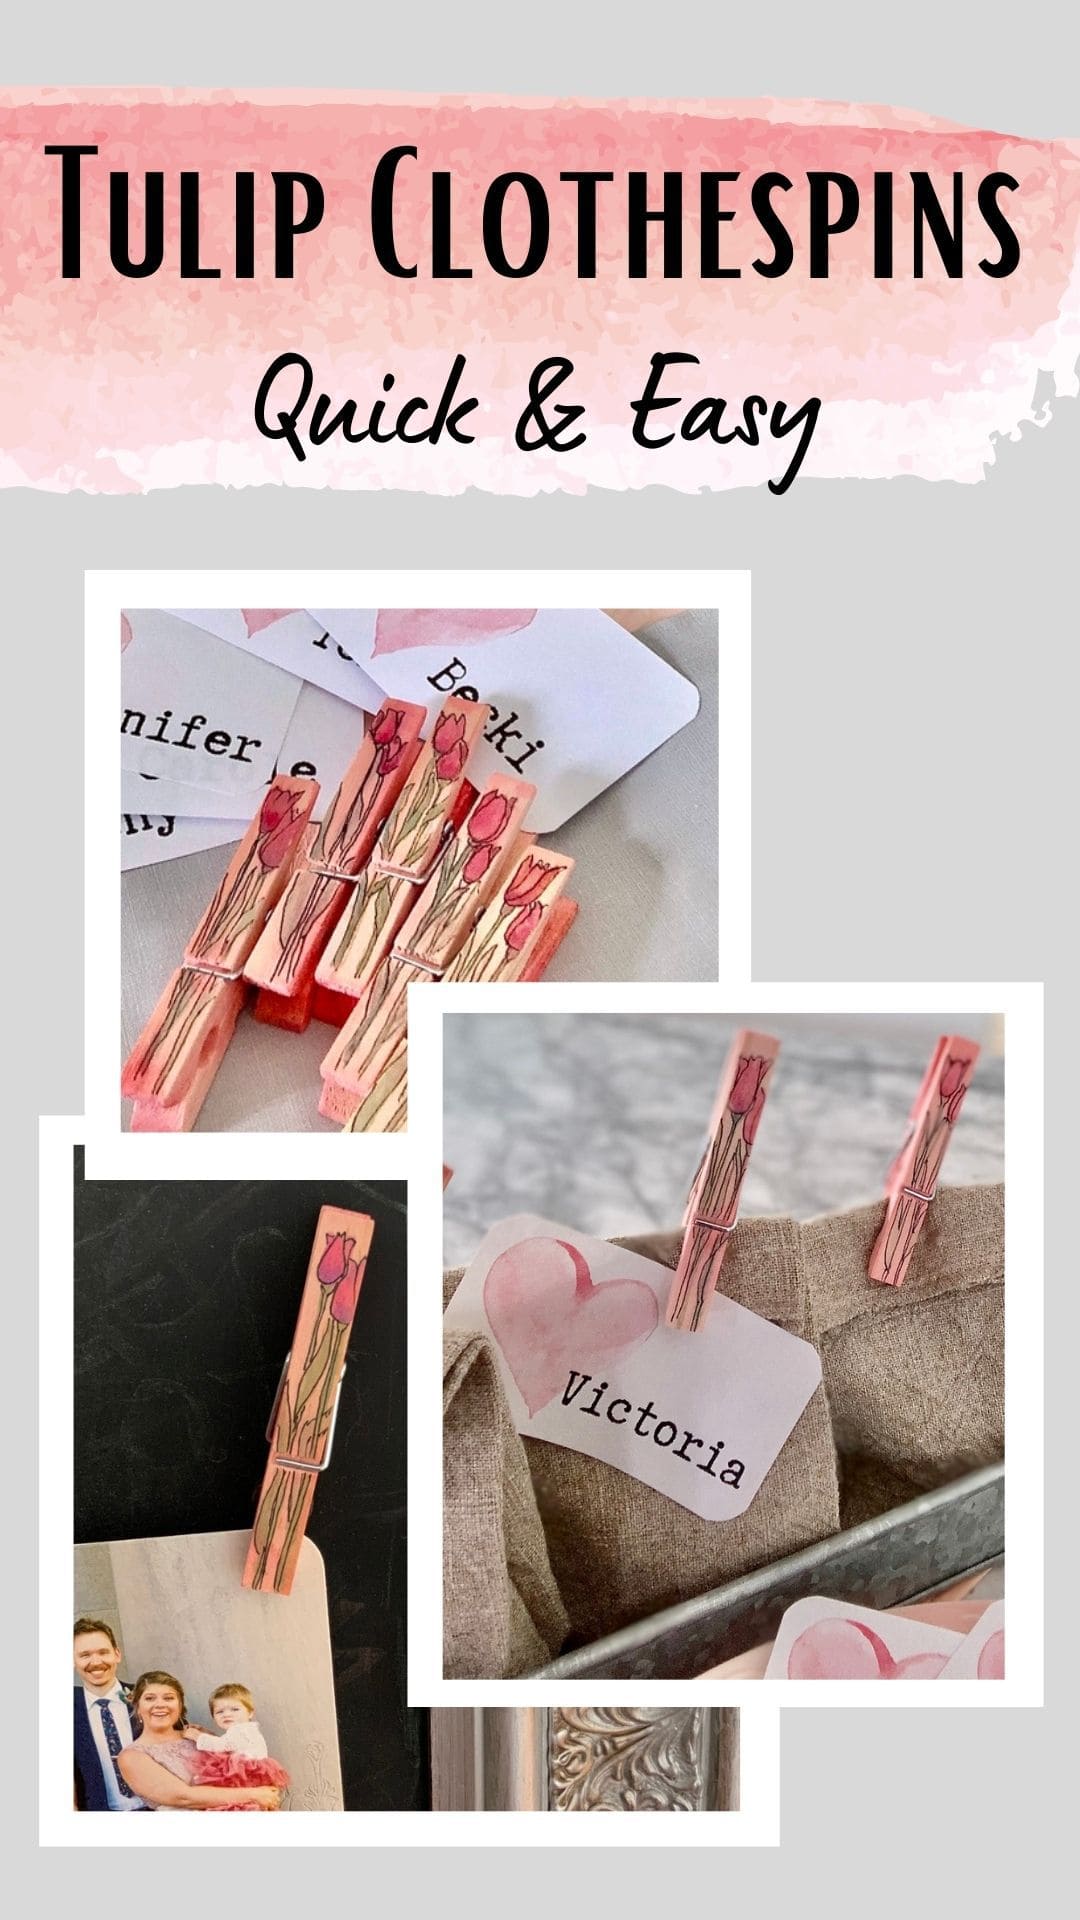 Pin Tower with three pictures of the finished tulip clothespins